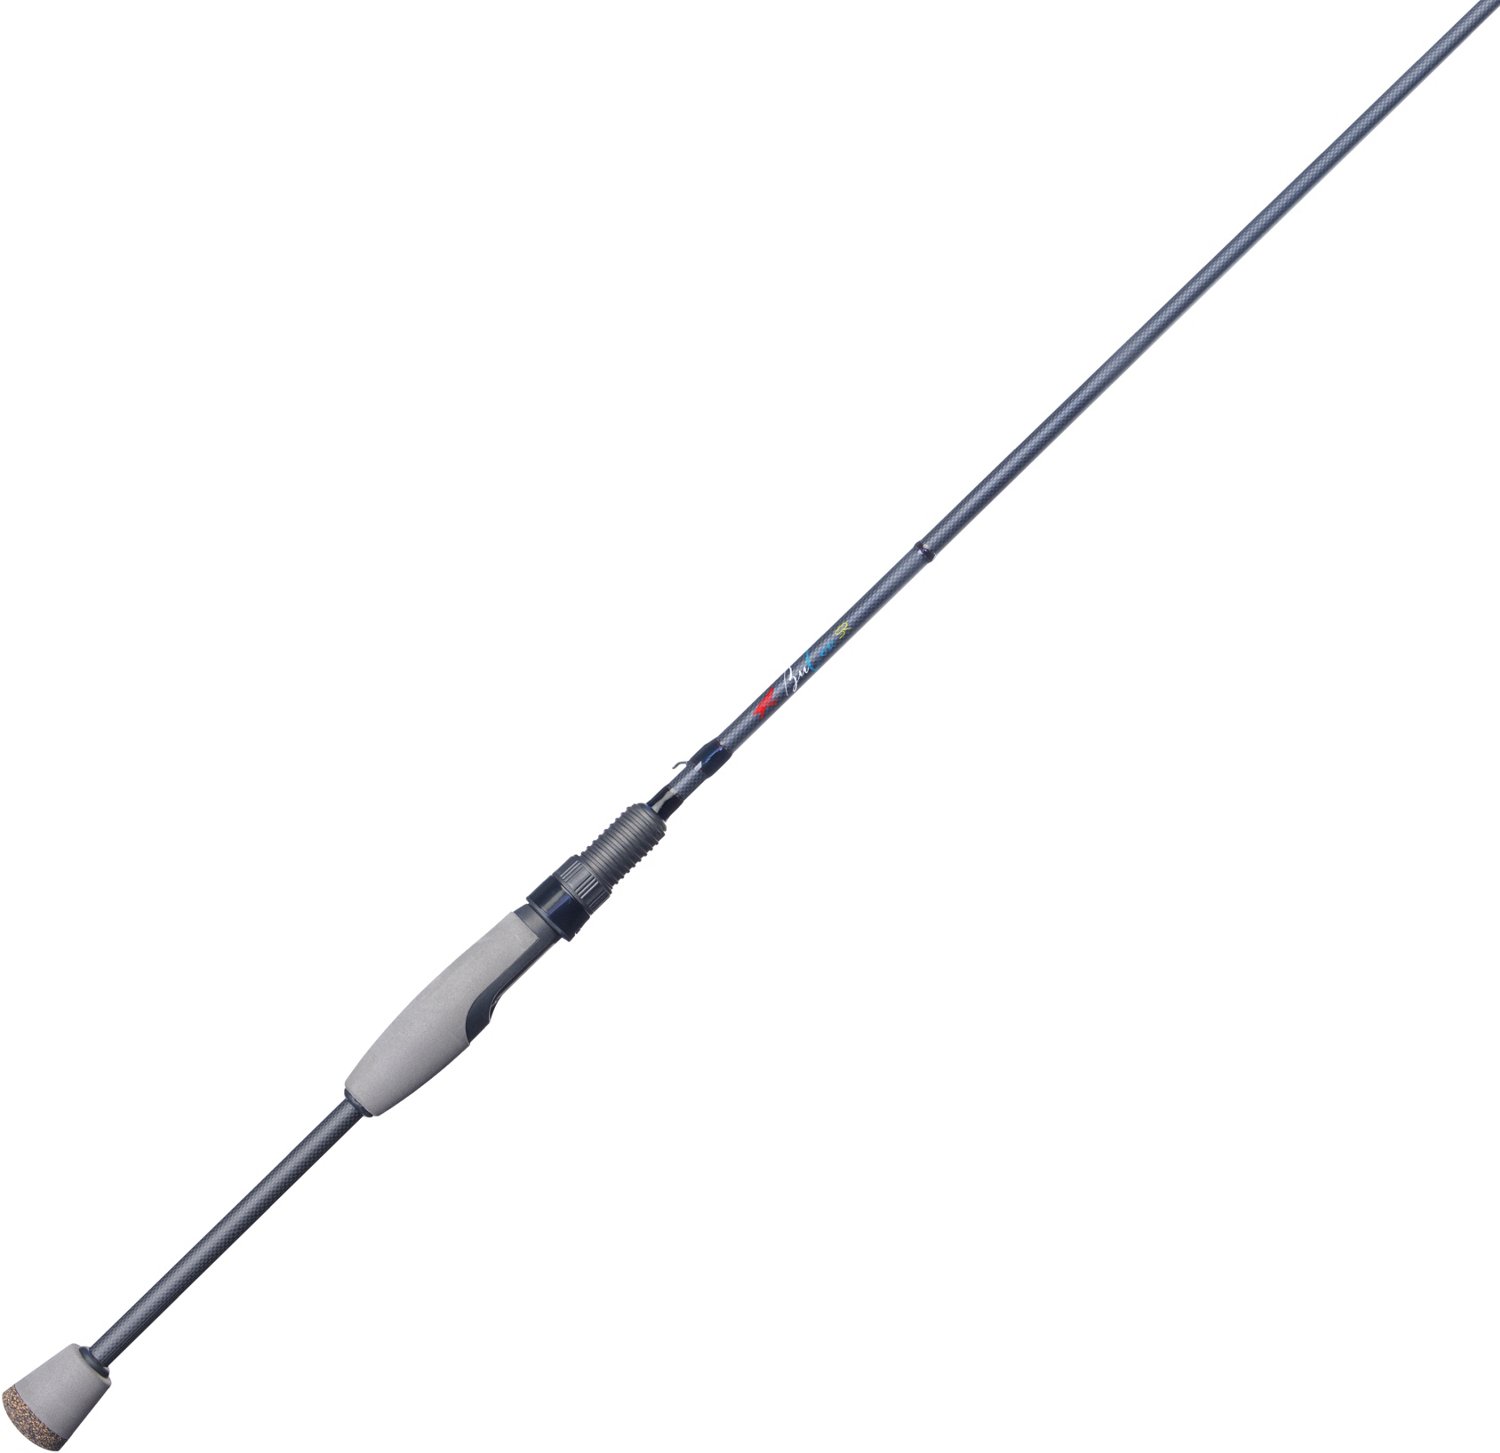 Falcon BuCoo SR Series Cranker Spin 7' Freshwater Spinning Rod